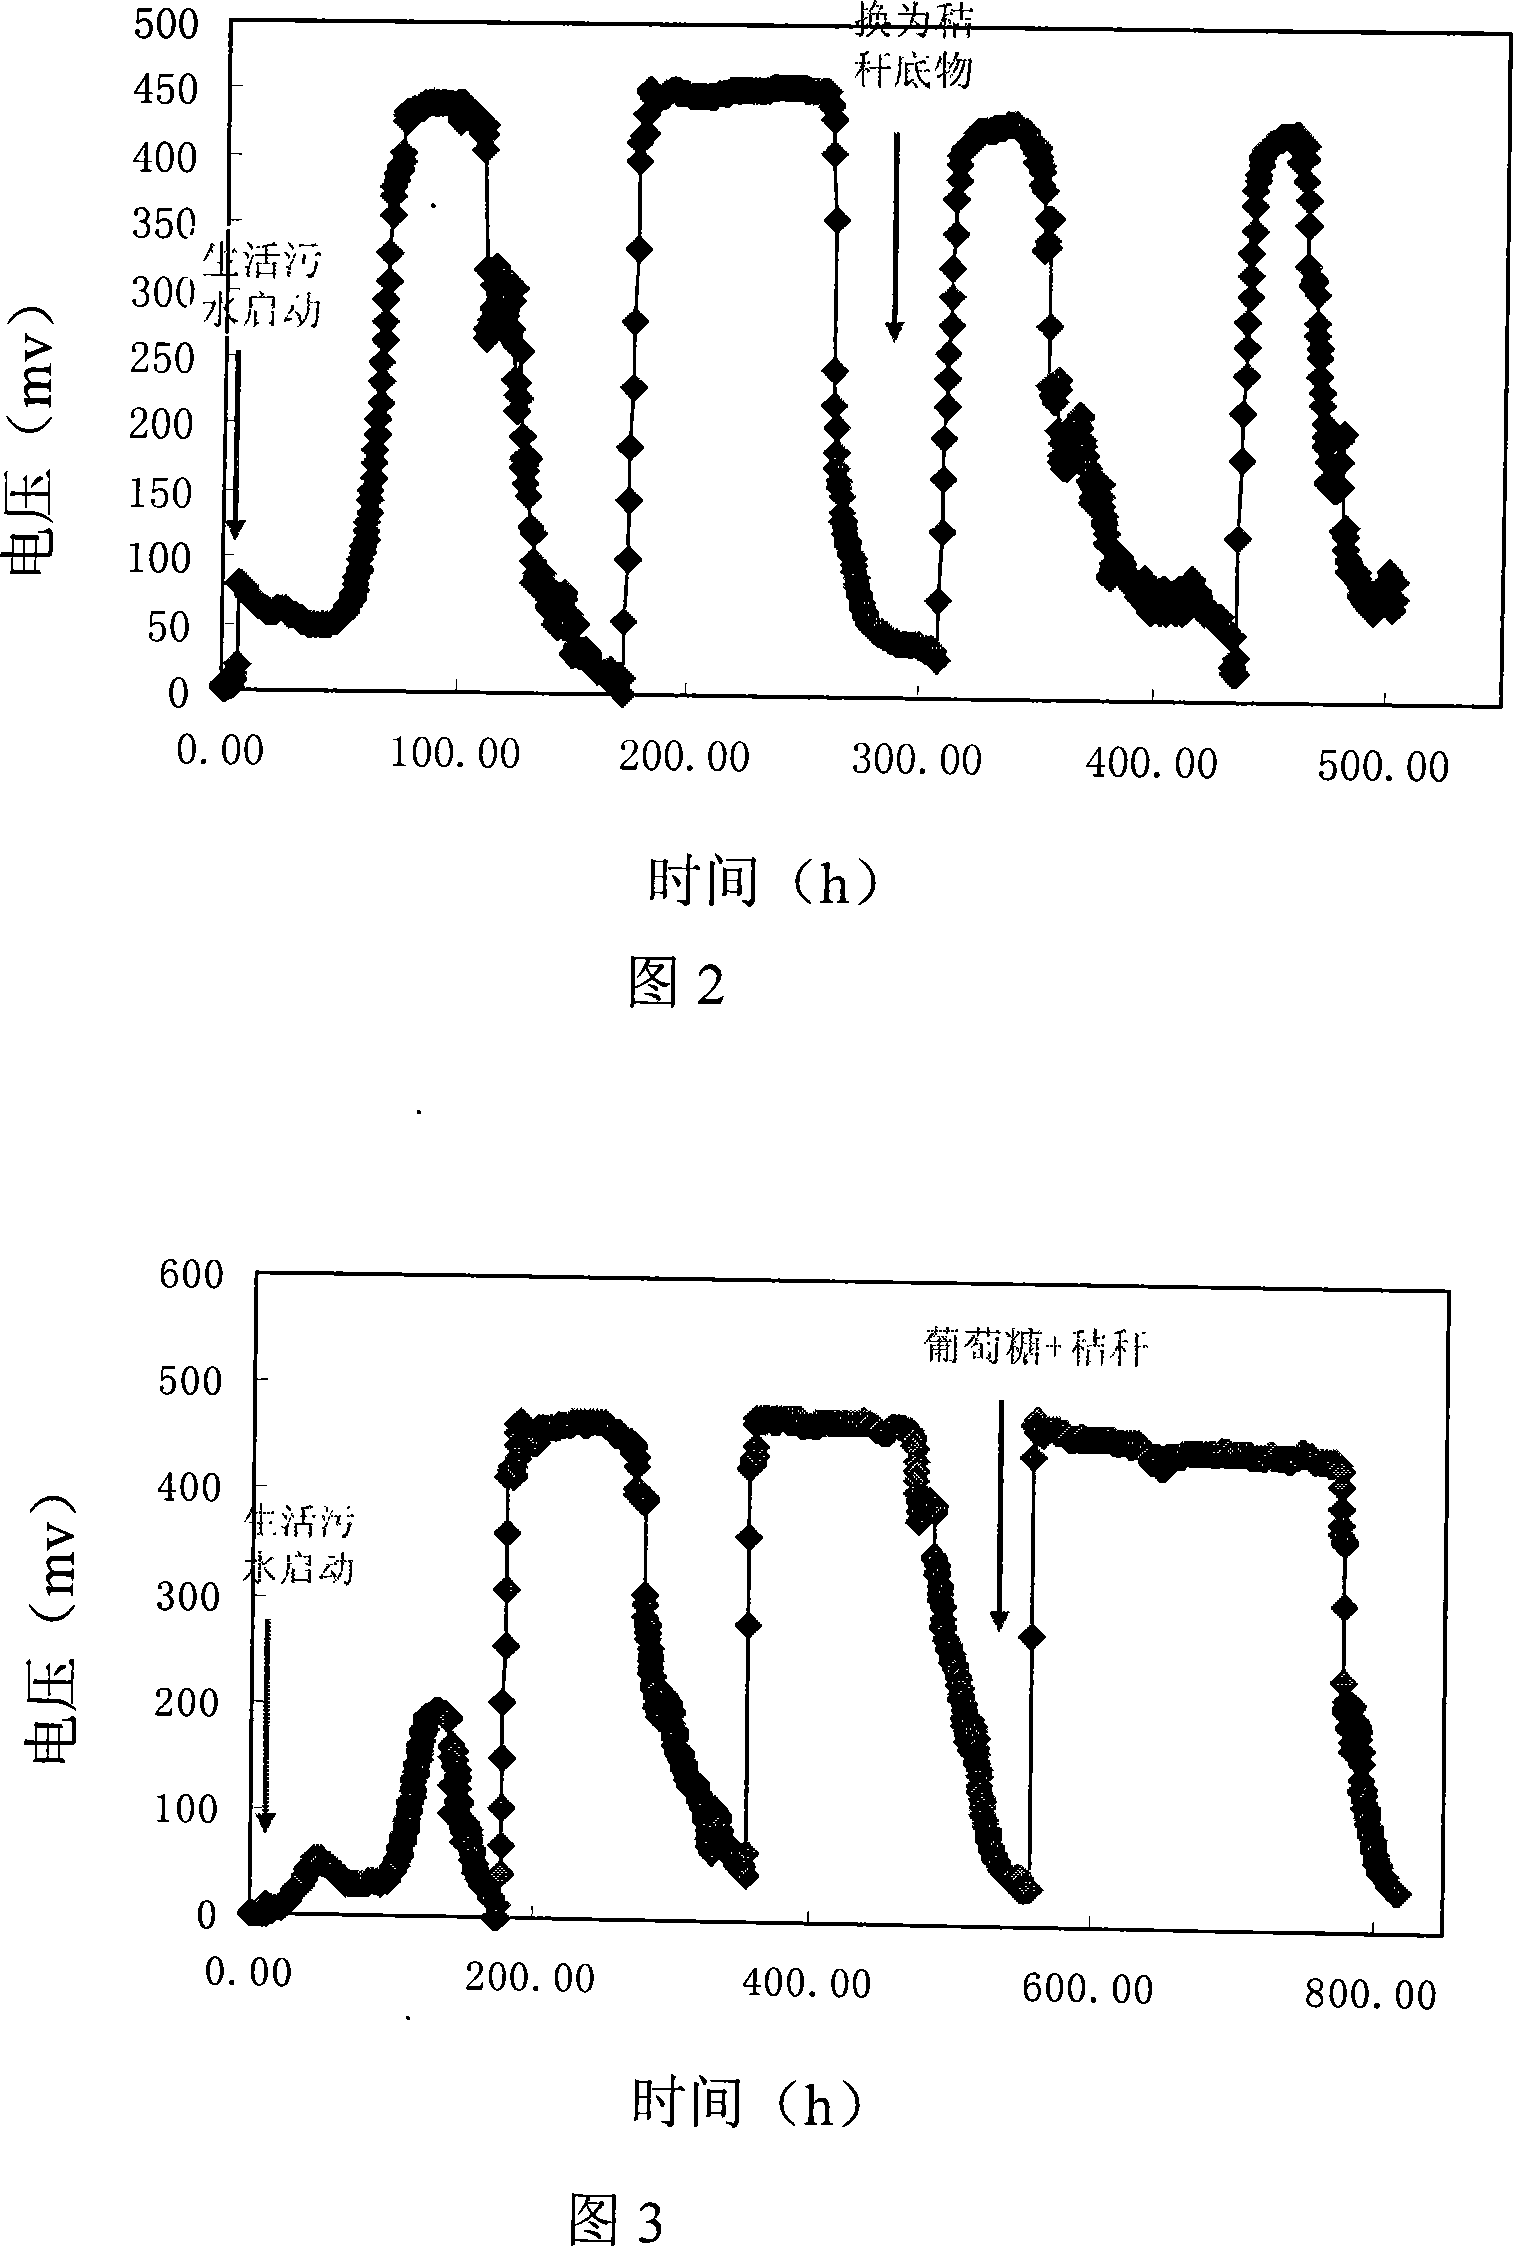 Method for microbe fuel battery and power generation by using straw stalk